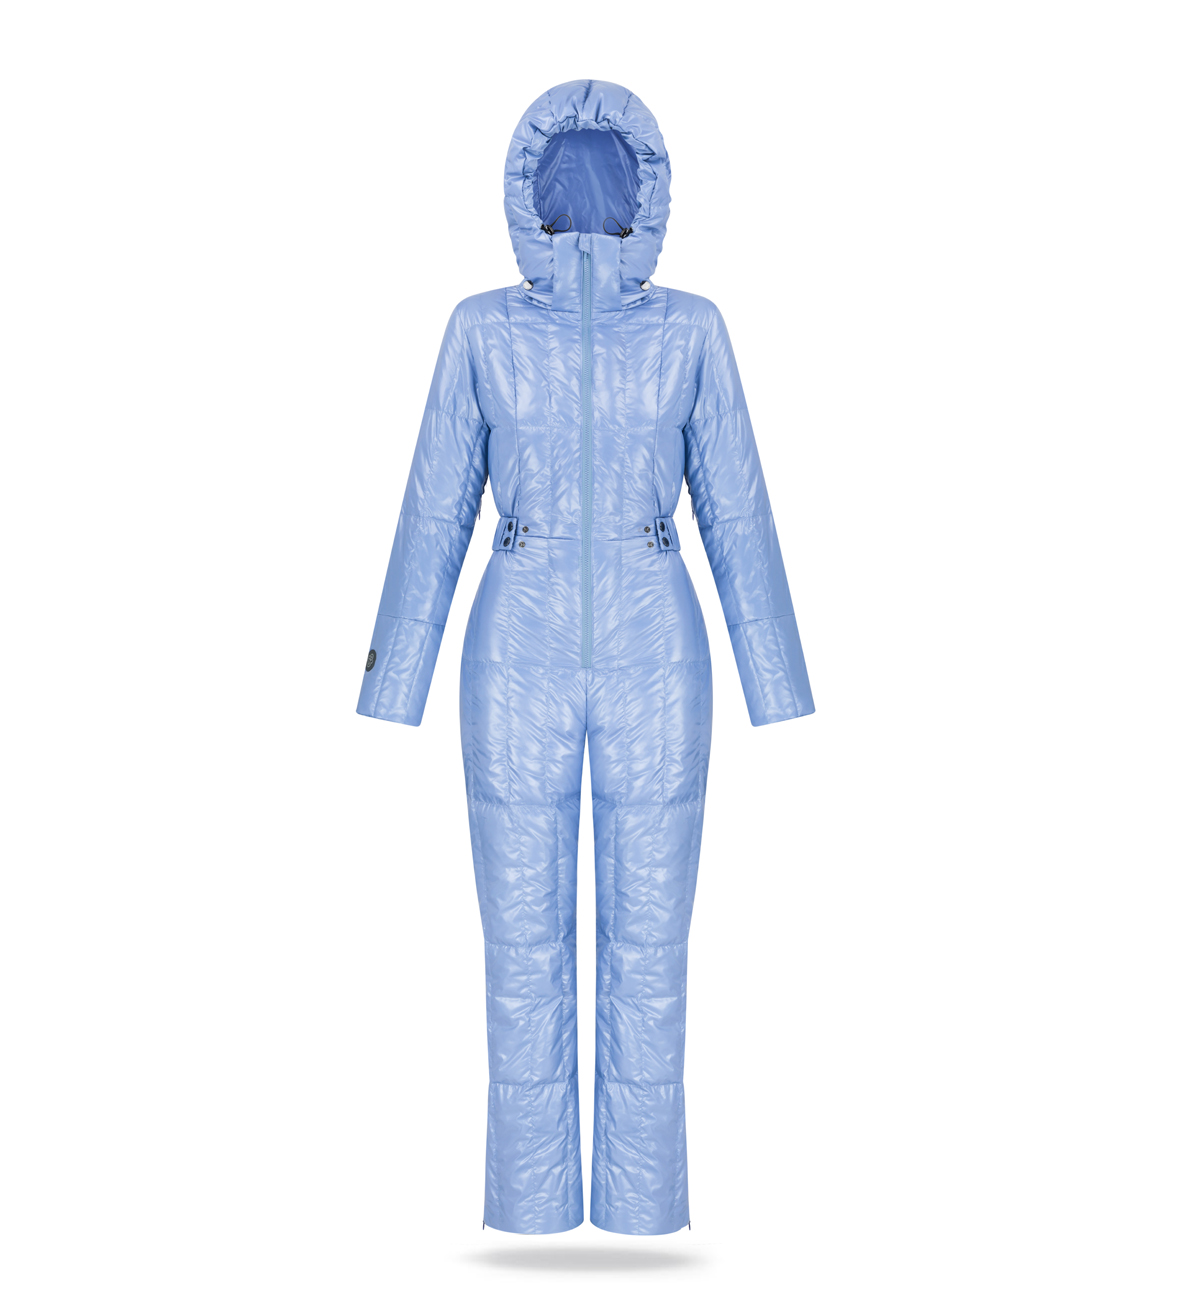 winter women snowsuit in light blue colour with hood and waistband